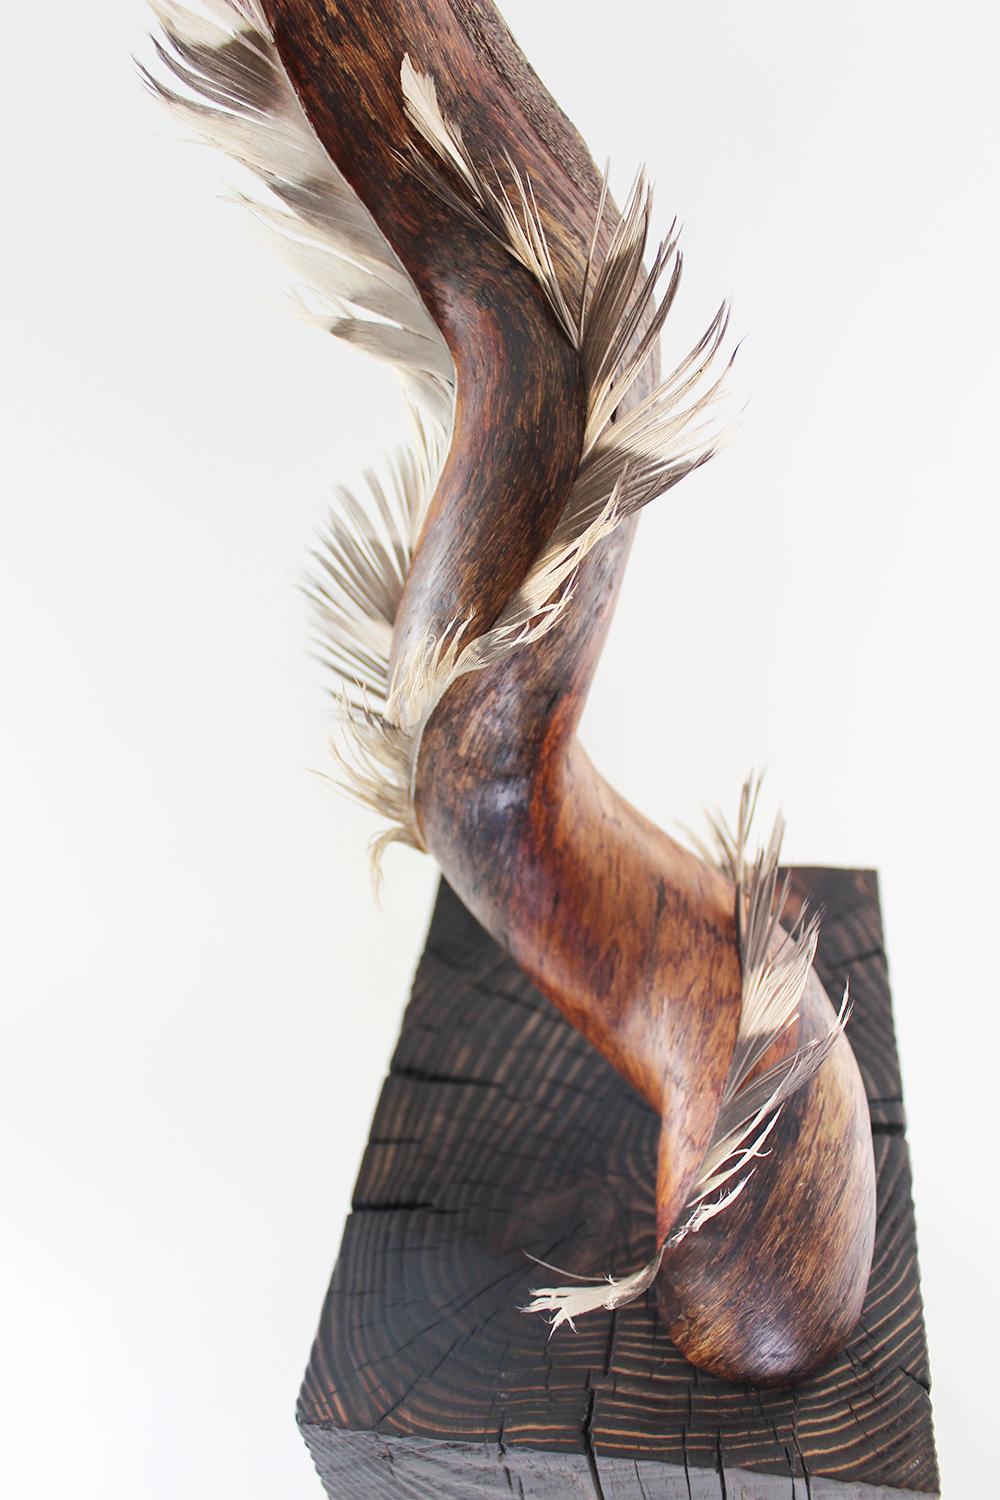 Miller Opie’s “Whisking Dream” is a gestural 22.5 x 8 x 6 inch White Oak wood sculpture with found feather details embedded into the wooden grain. It is the sixth piece in her 8 piece 